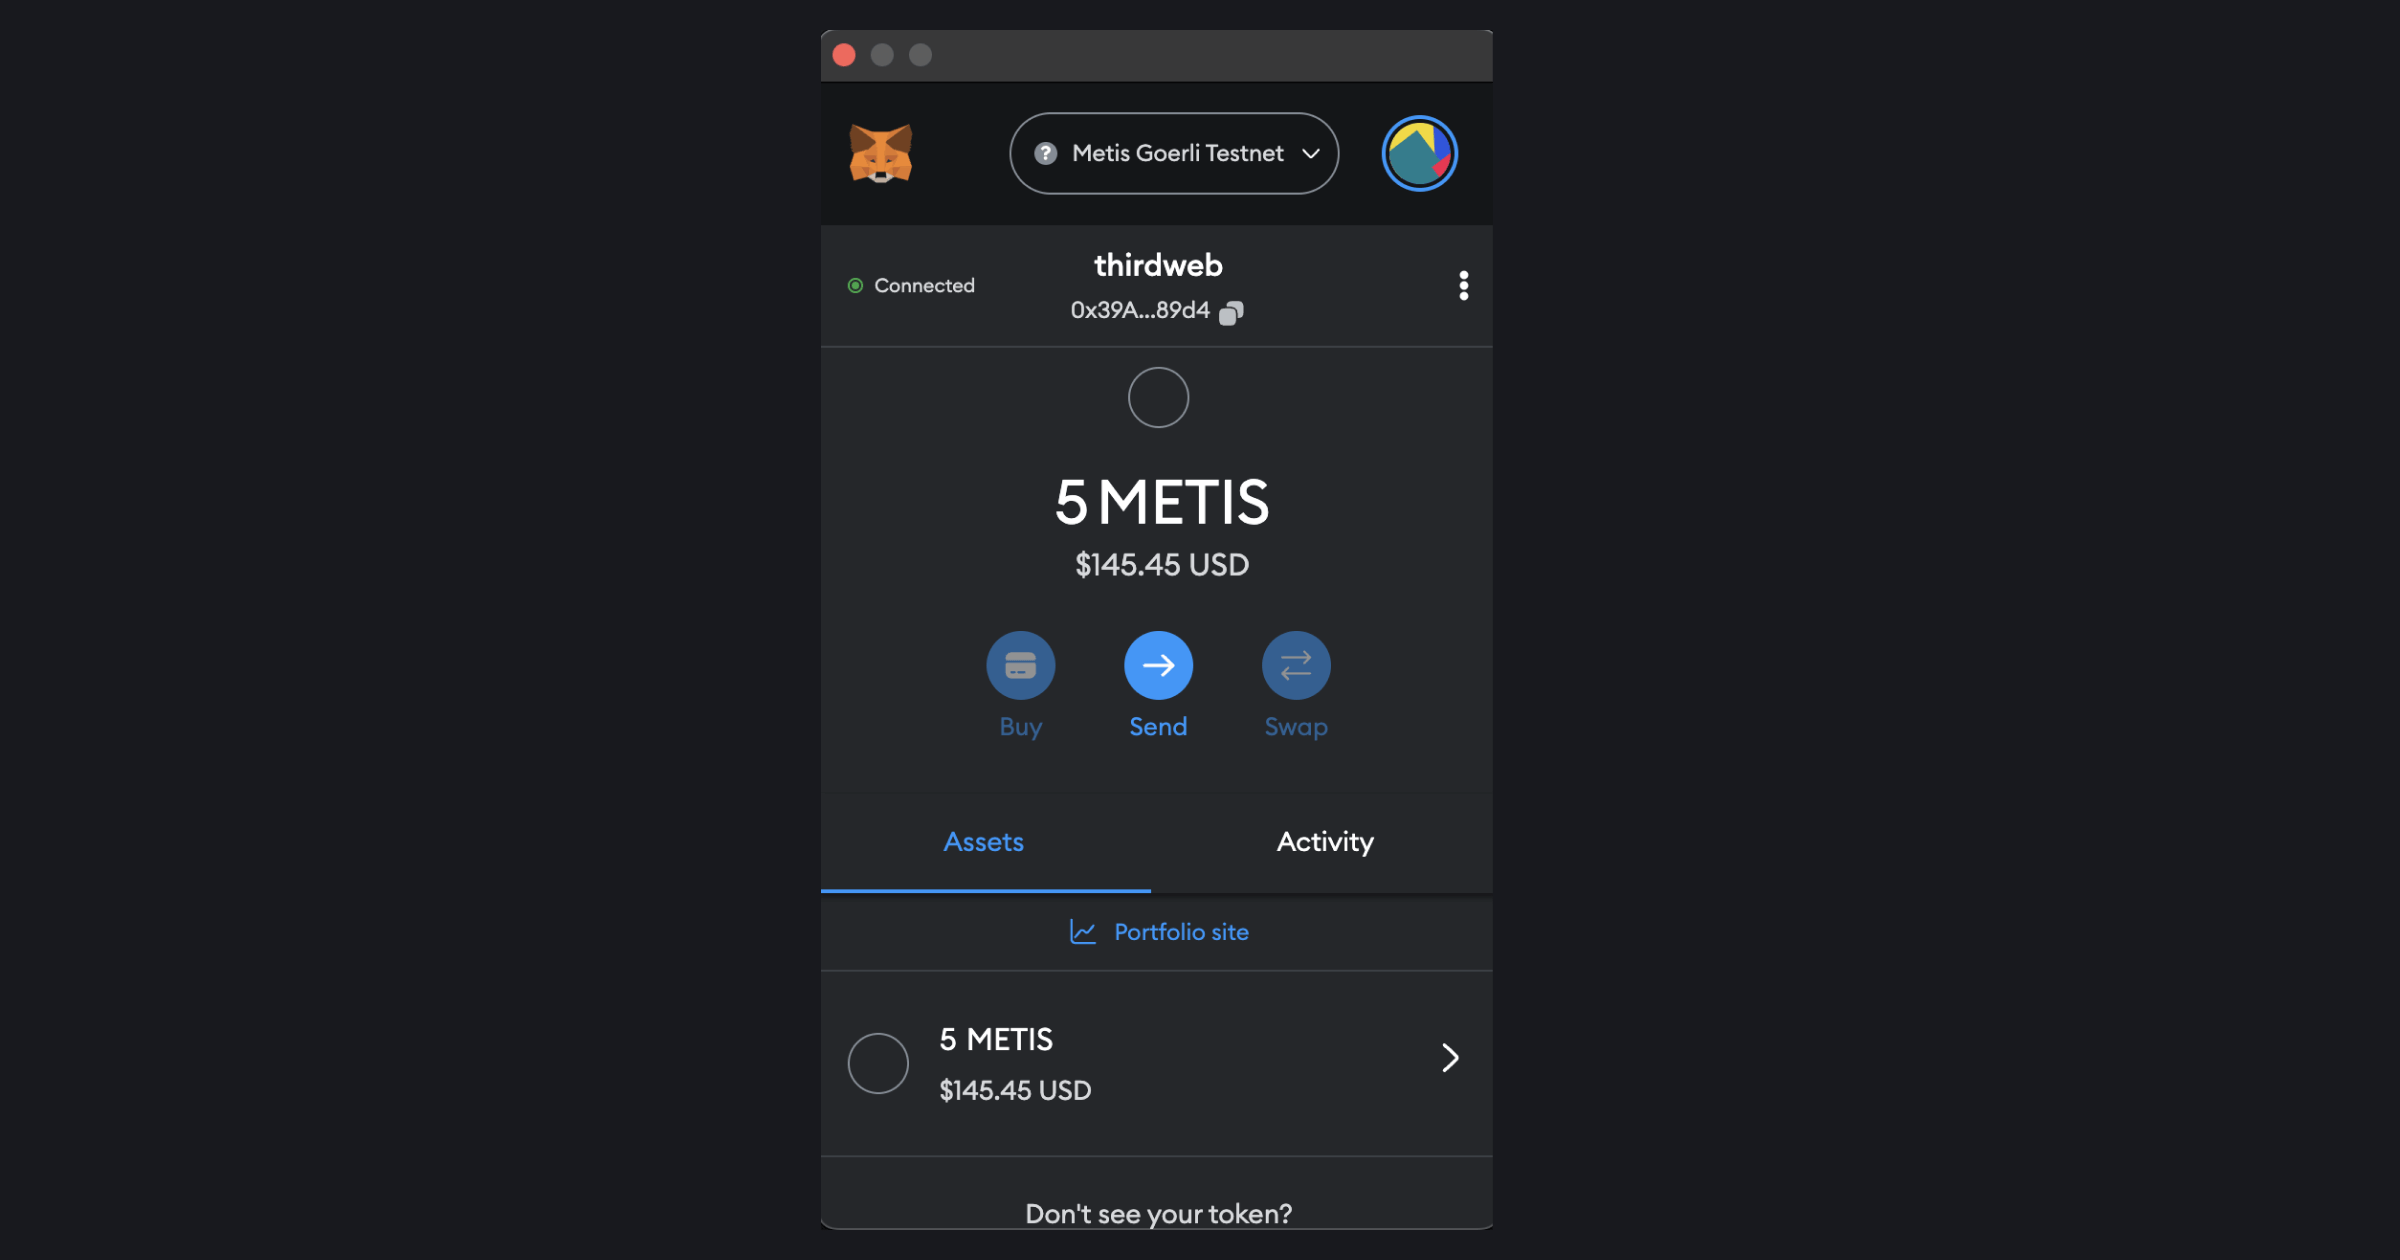 Funds have arrived in your wallet on Metis Goerli Faucet